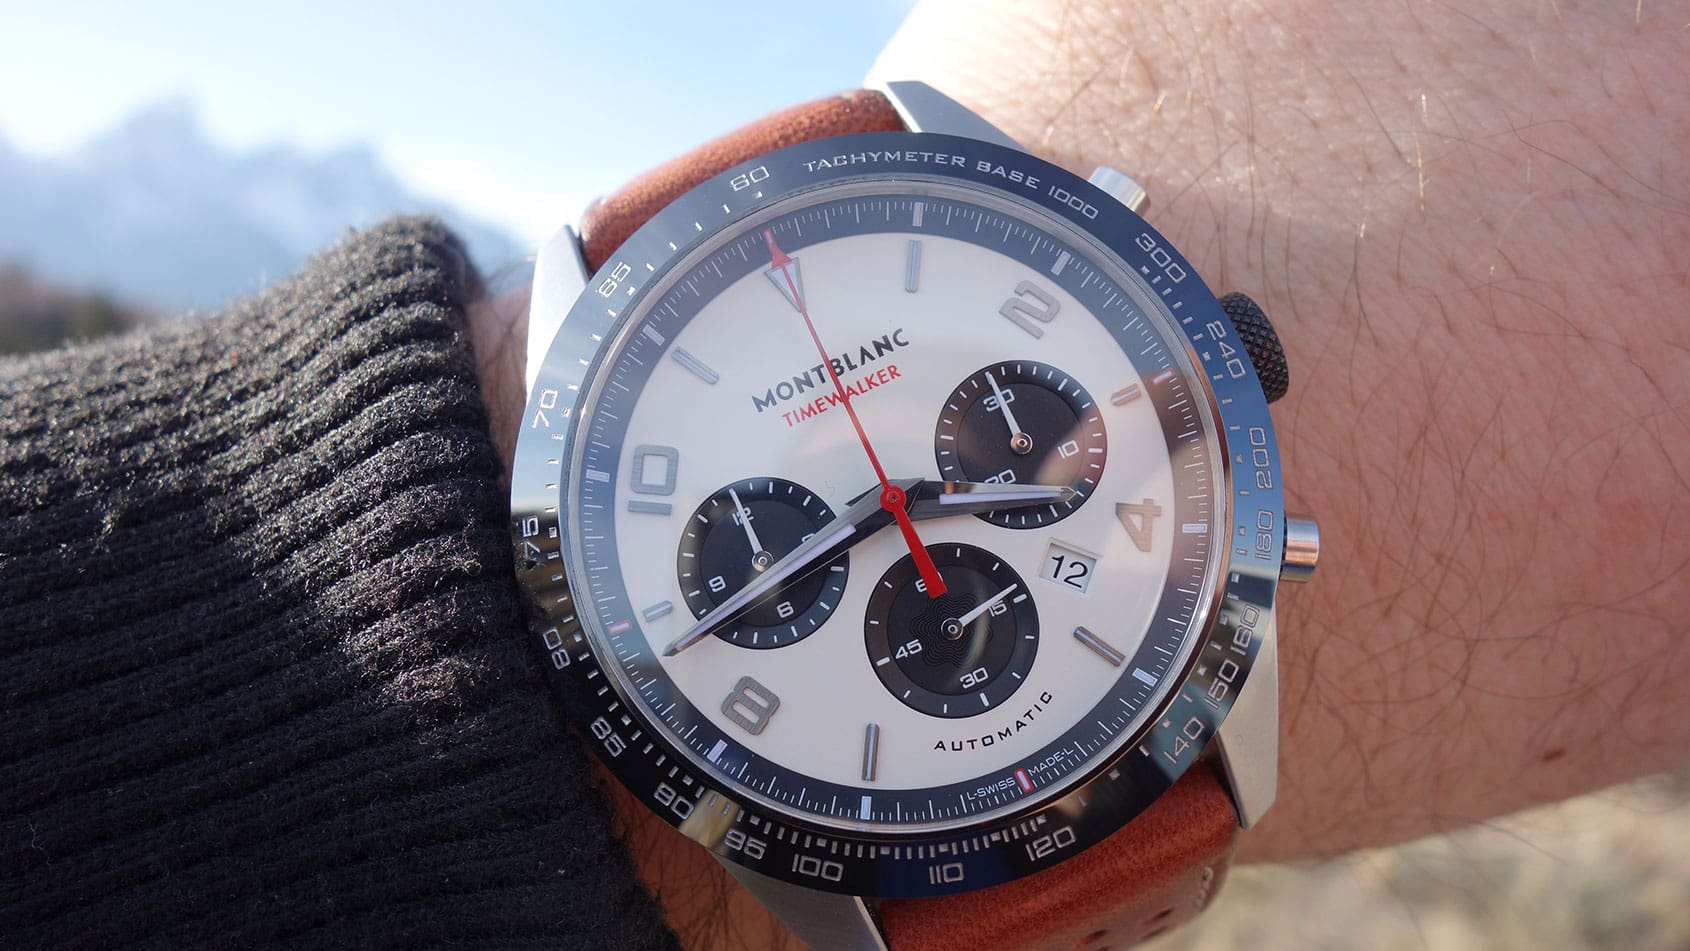 Another look at the Montblanc TimeWalker Manufacture Chronograph